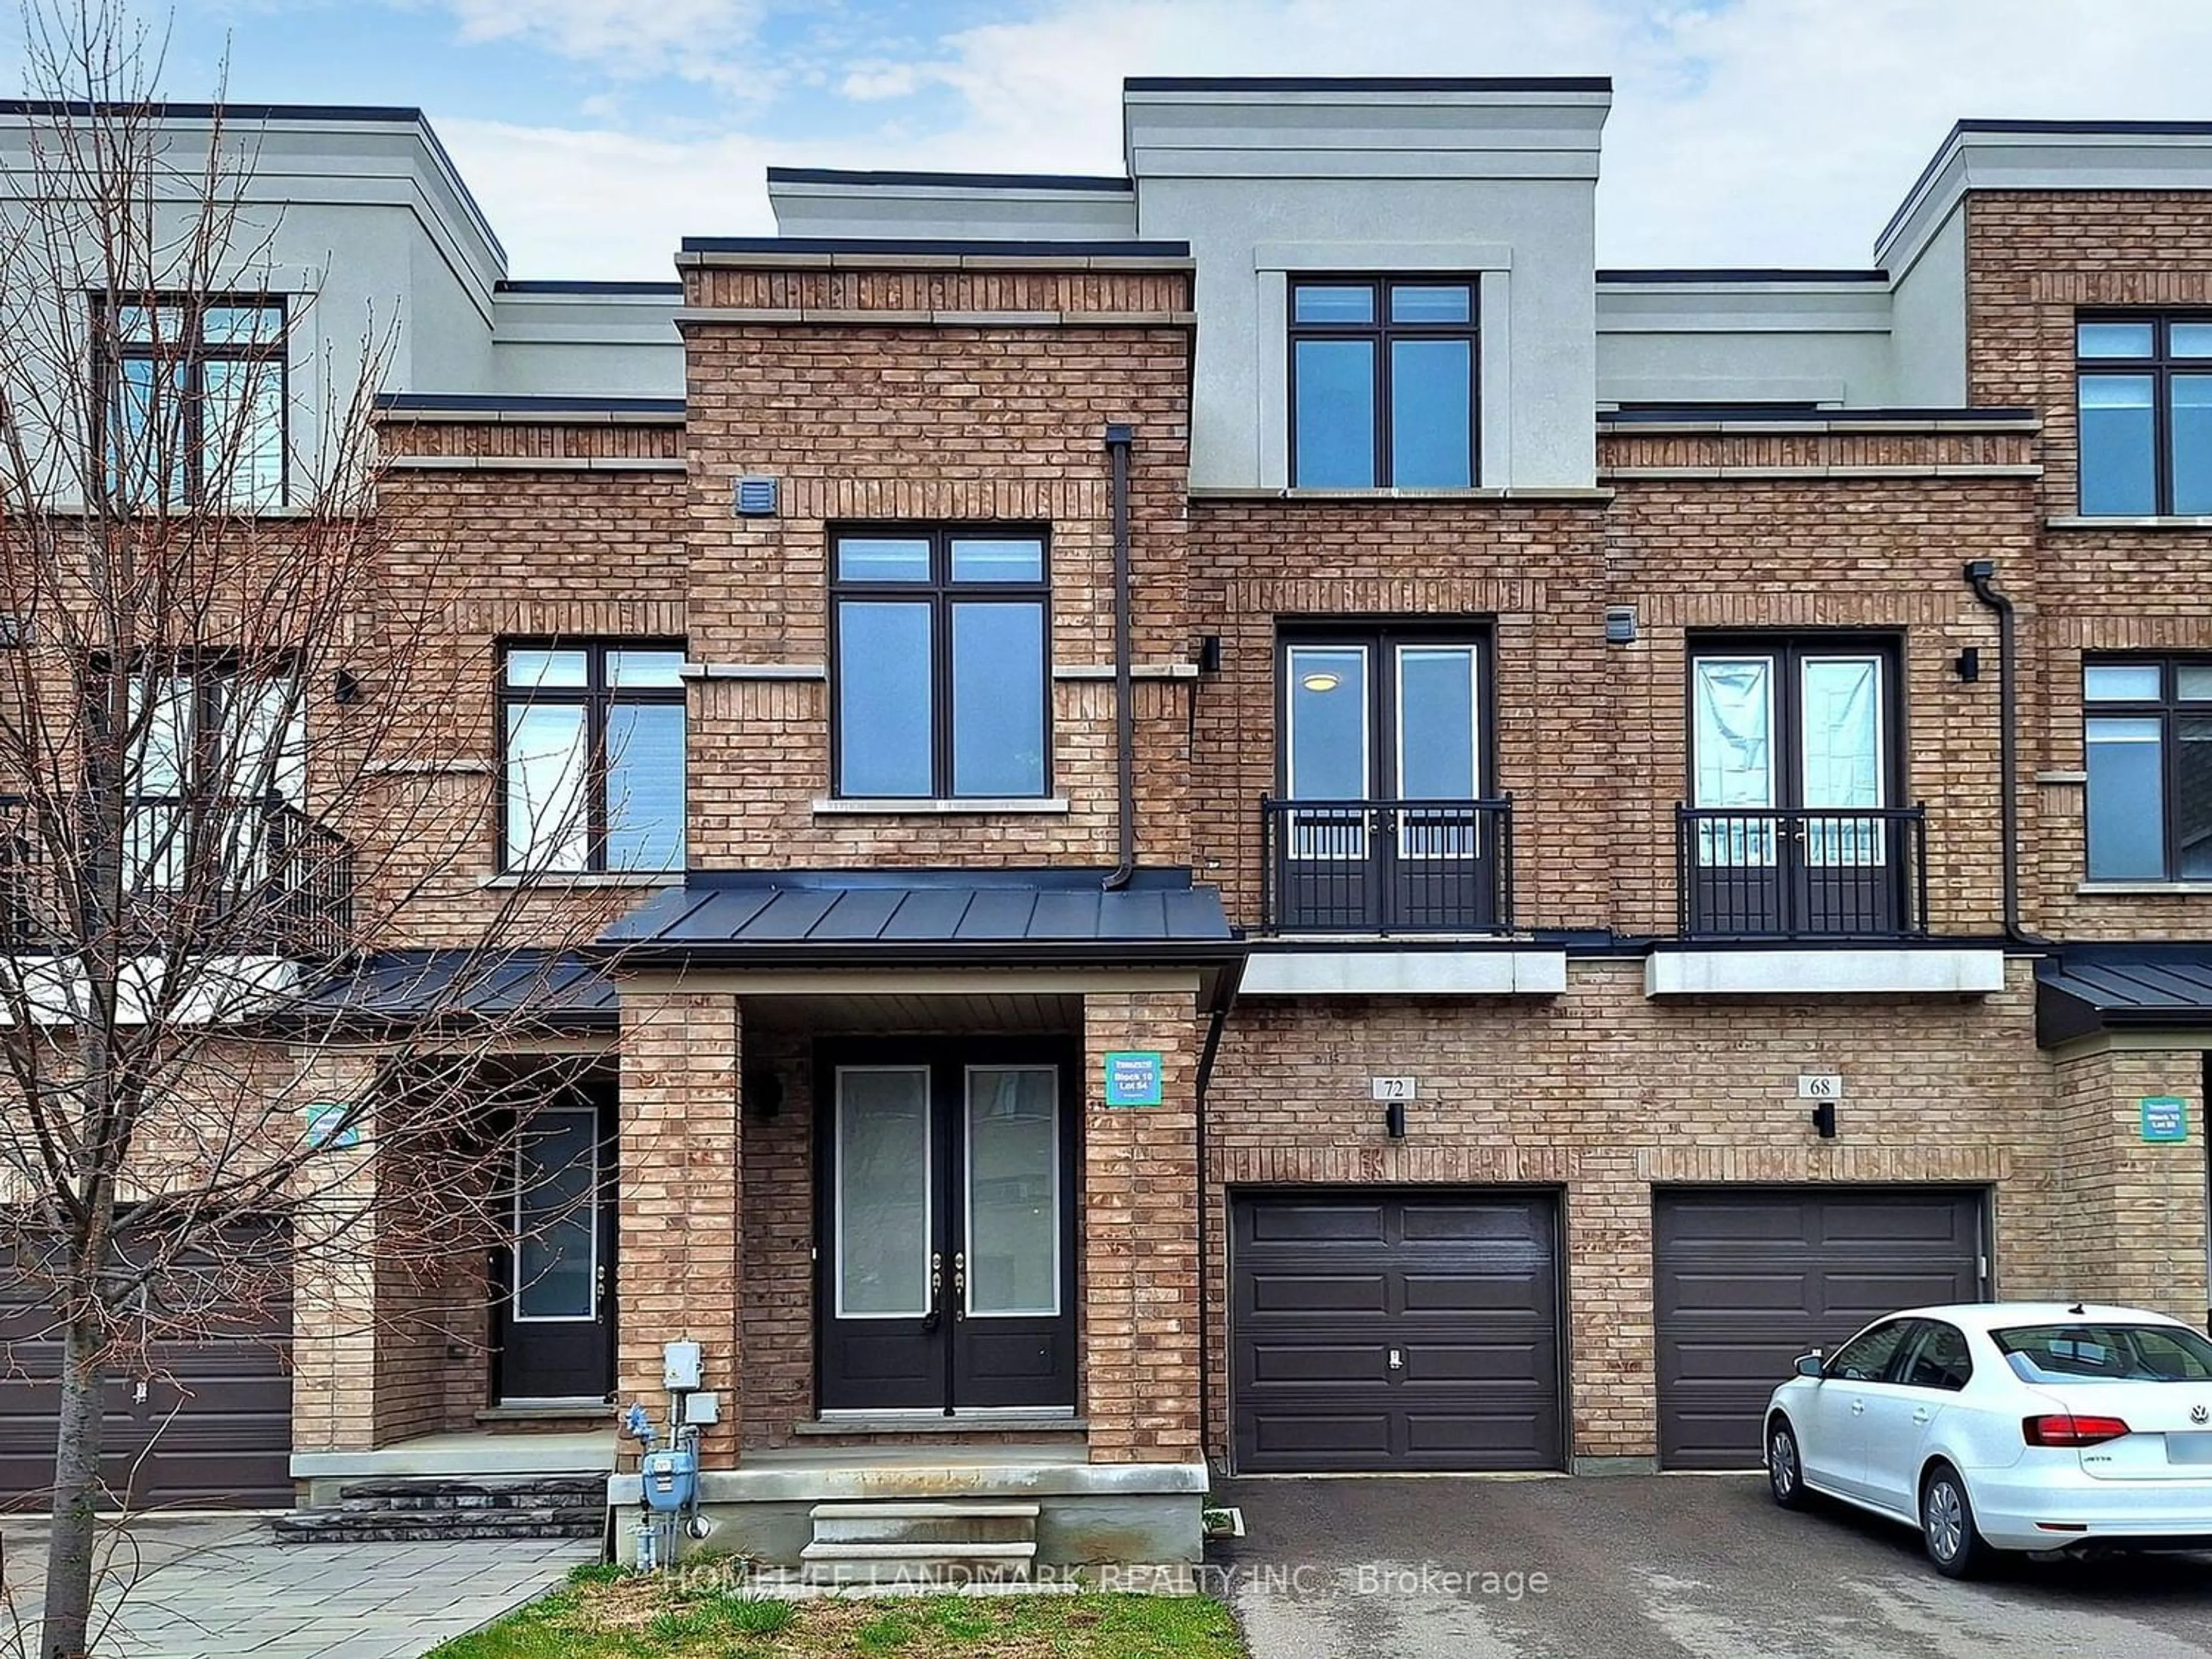 Home with brick exterior material for 72 Elyse Crt, Aurora Ontario L4G 2C9